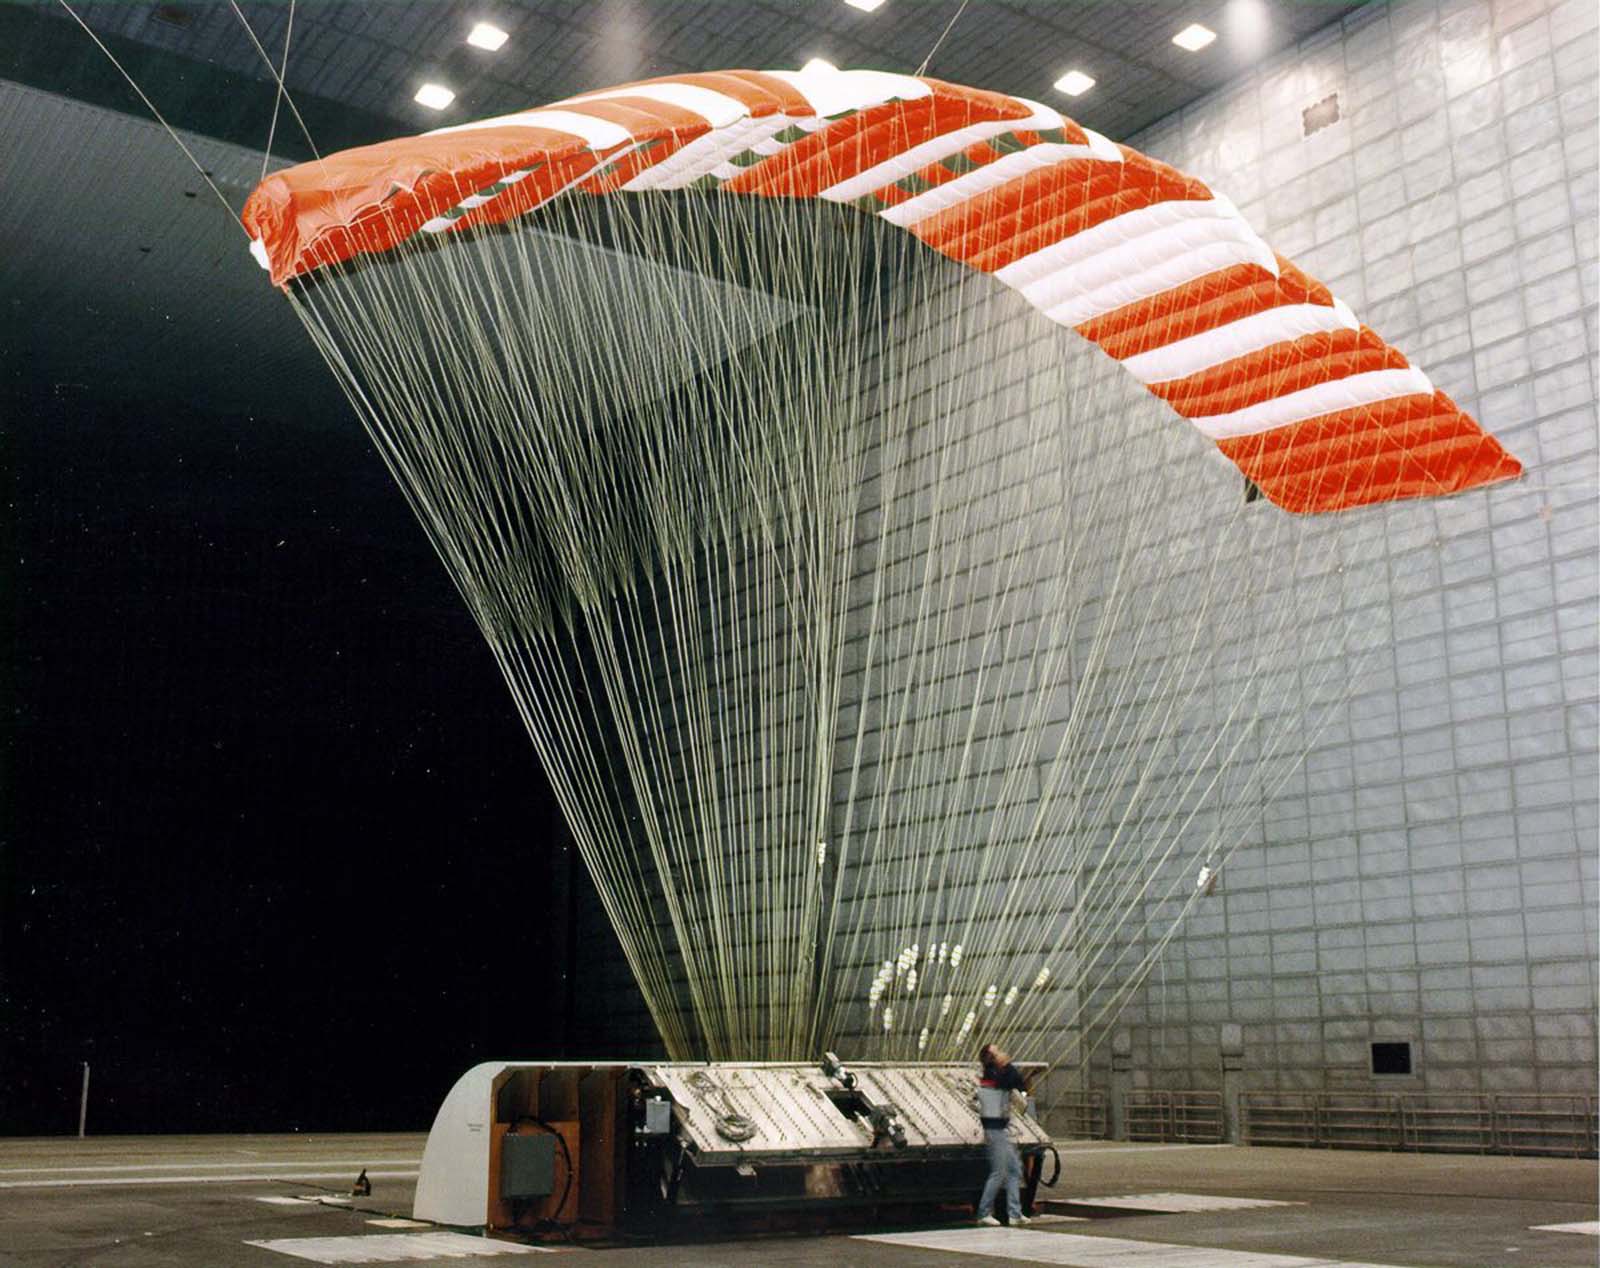 The Pioneer Aerospace Parafoil undergoes testing in the world’s largest wind tunnel, the 80 x 120-Foot Tunnel at NASA’s Ames Research Center in Mountain View, 1990